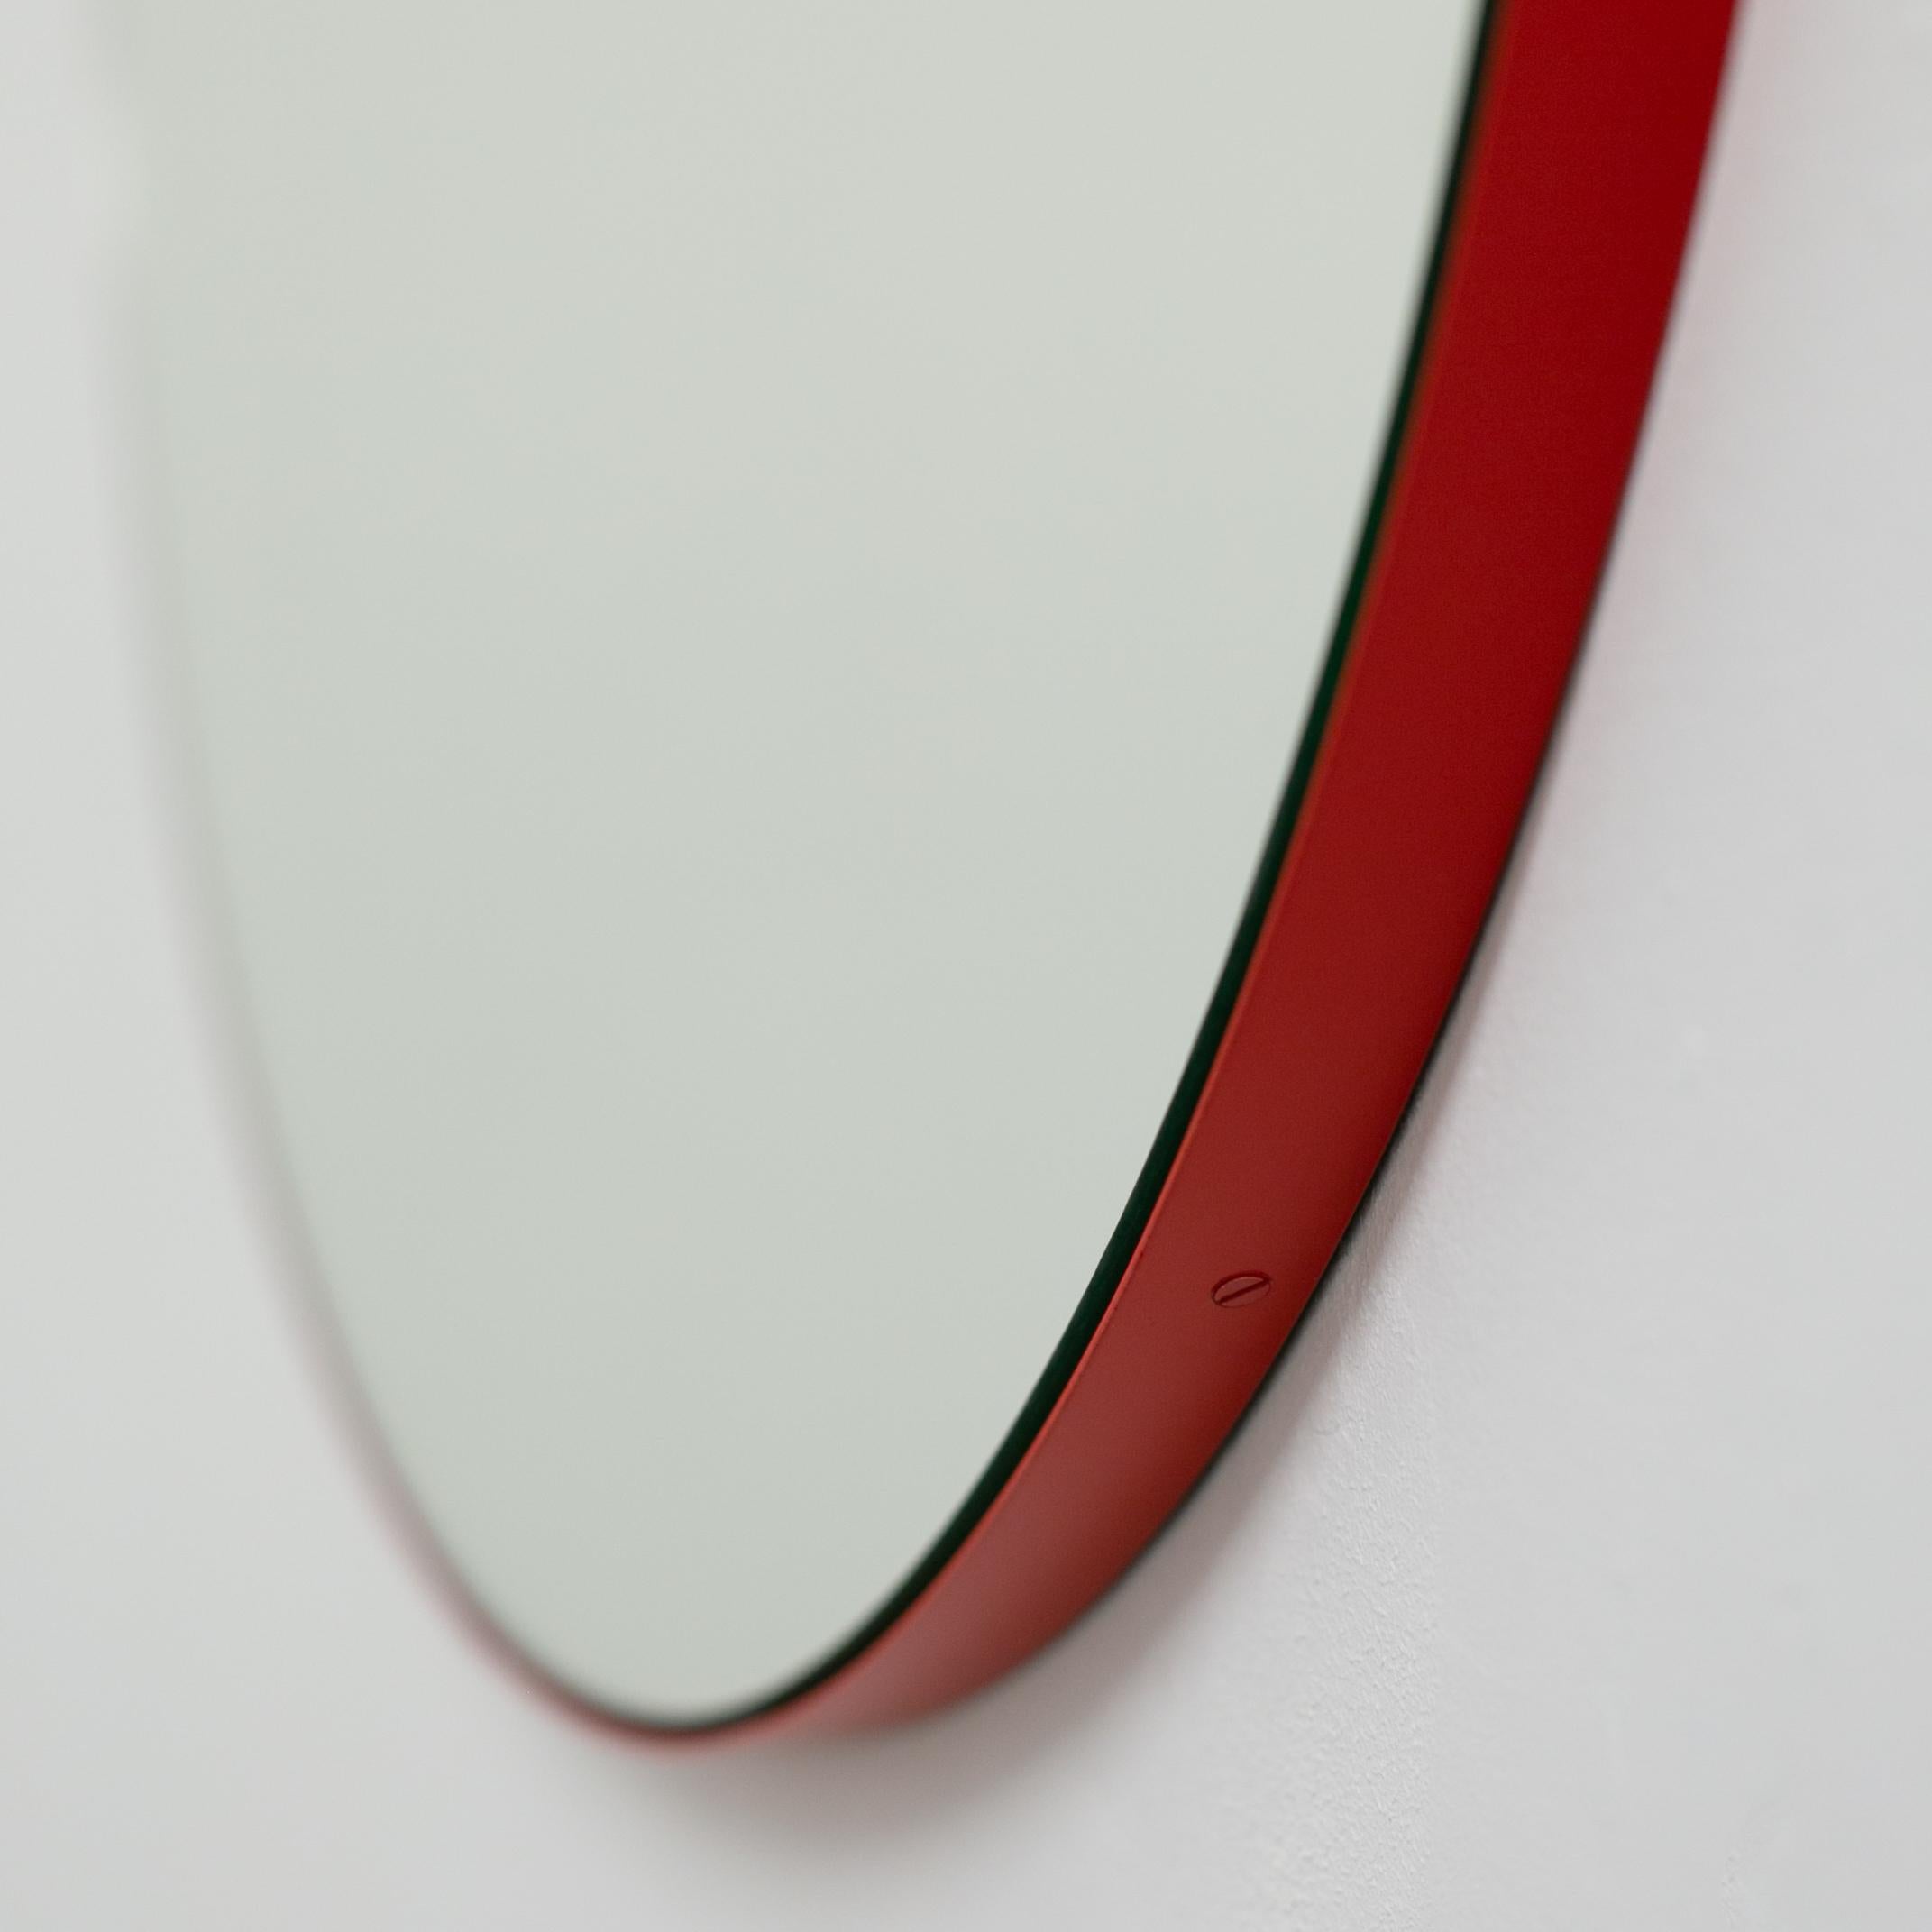 Modern round mirror with a vibrant red powder coated aluminium frame. Designed and handcrafted in London, UK.

Medium, large and extra-large mirrors (60, 80 and 100cm) are fitted with an ingenious French cleat (split batten) system so they may hang